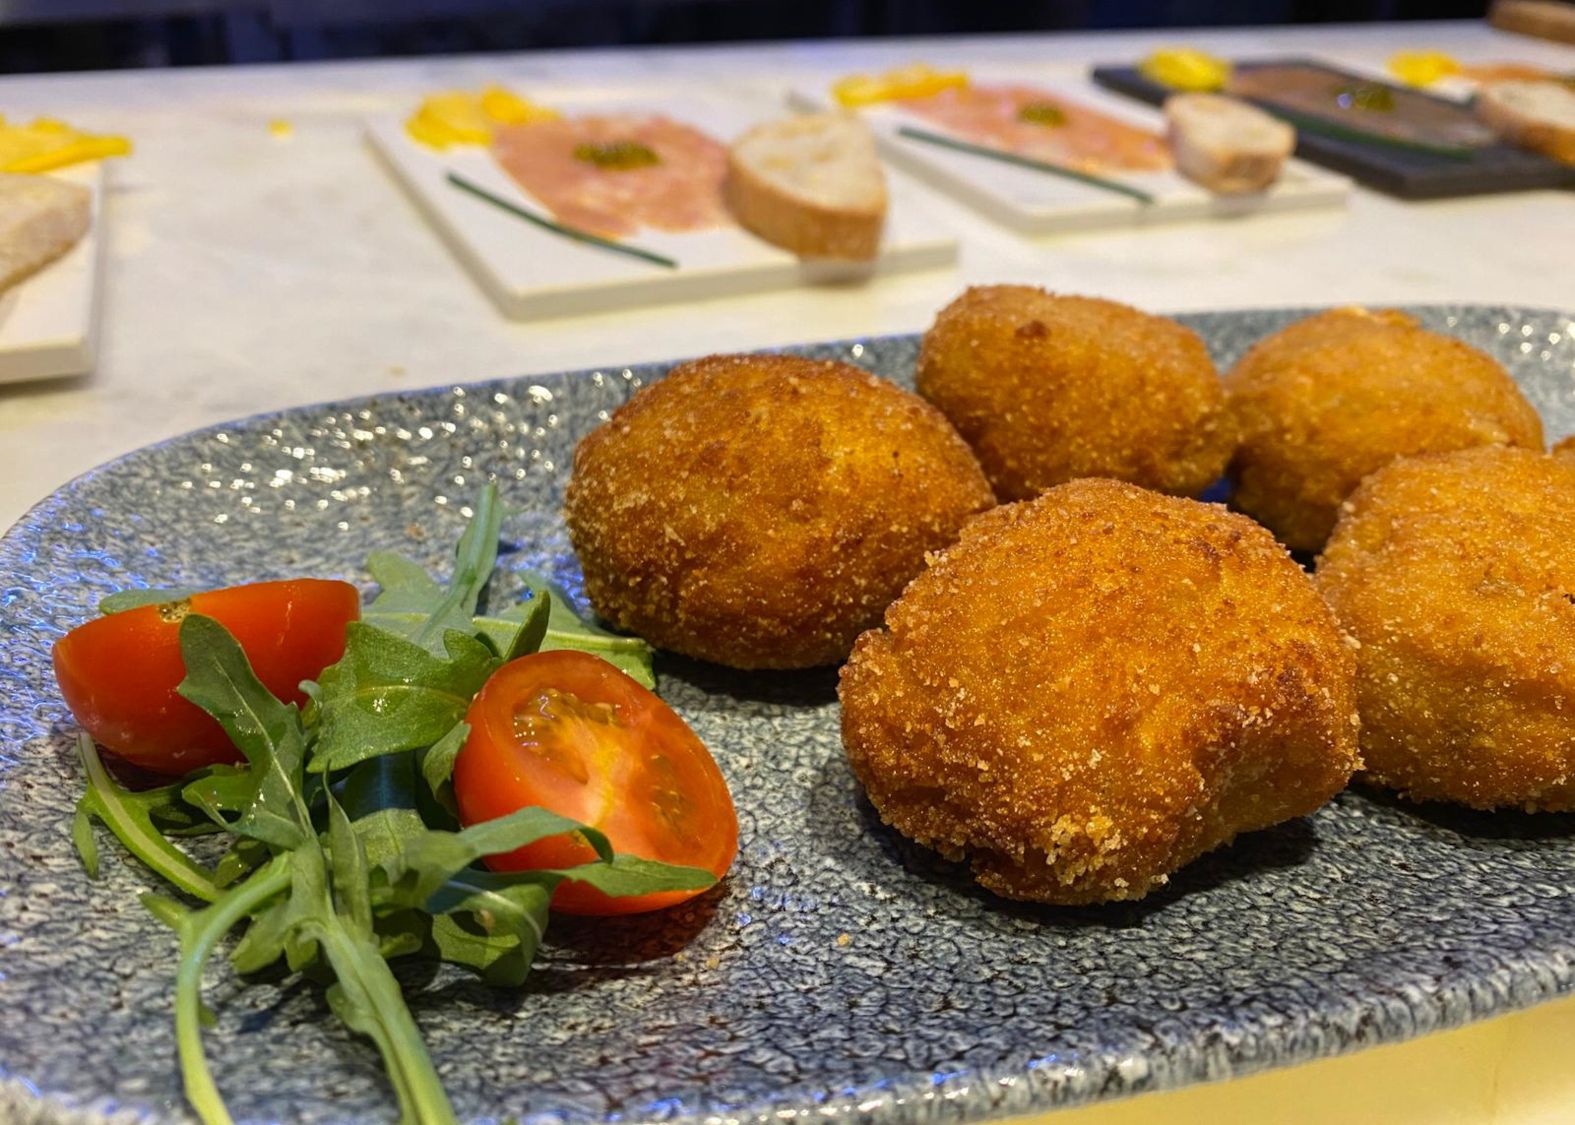 Croquettes with a cherry tomato cutted in half